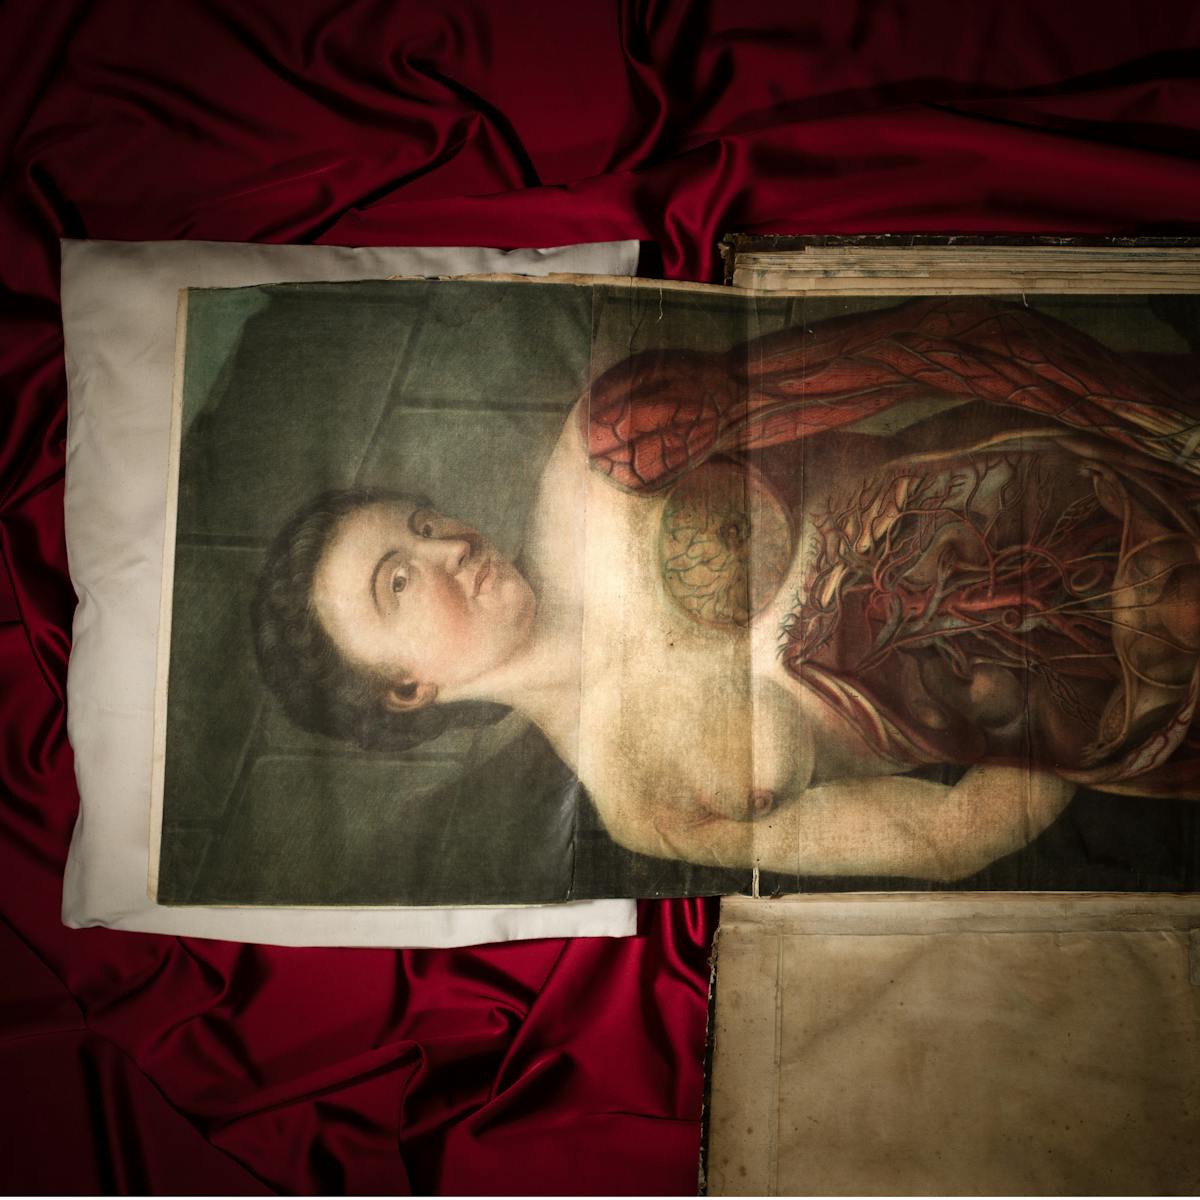 Colour photograph of an anatomy manuscript engraved by Gautier D'Agoty. The manuscript has been folded out from its book, and the head of the female body depicted rests upon a cushion. Underneath the manuscript is a rumpled, vivid red satin fabric.